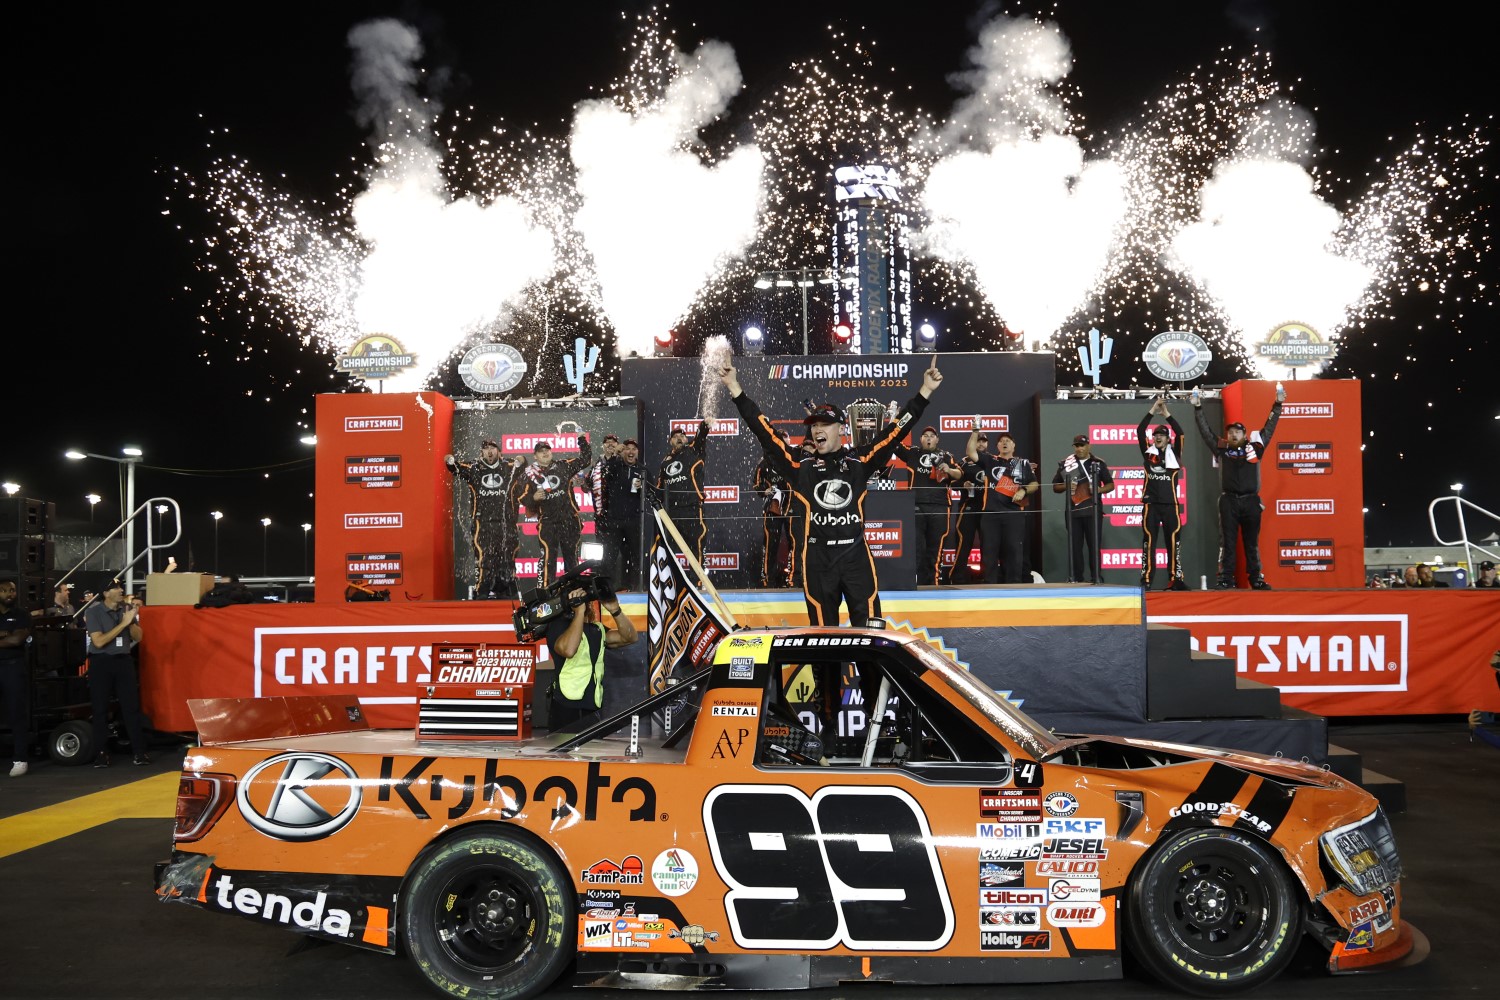 Ben Rhodes, driver of the #99 Kubota Ford, celebrates in victory lane after winning the 2023 NASCAR Craftsman Truck Series Championship, finishing first of the Championship 4 drivers in NASCAR Craftsman Truck Series Craftsman 150 at Phoenix Raceway on November 03, 2023 in Avondale, Arizona. (Photo by Chris Graythen/Getty Images)